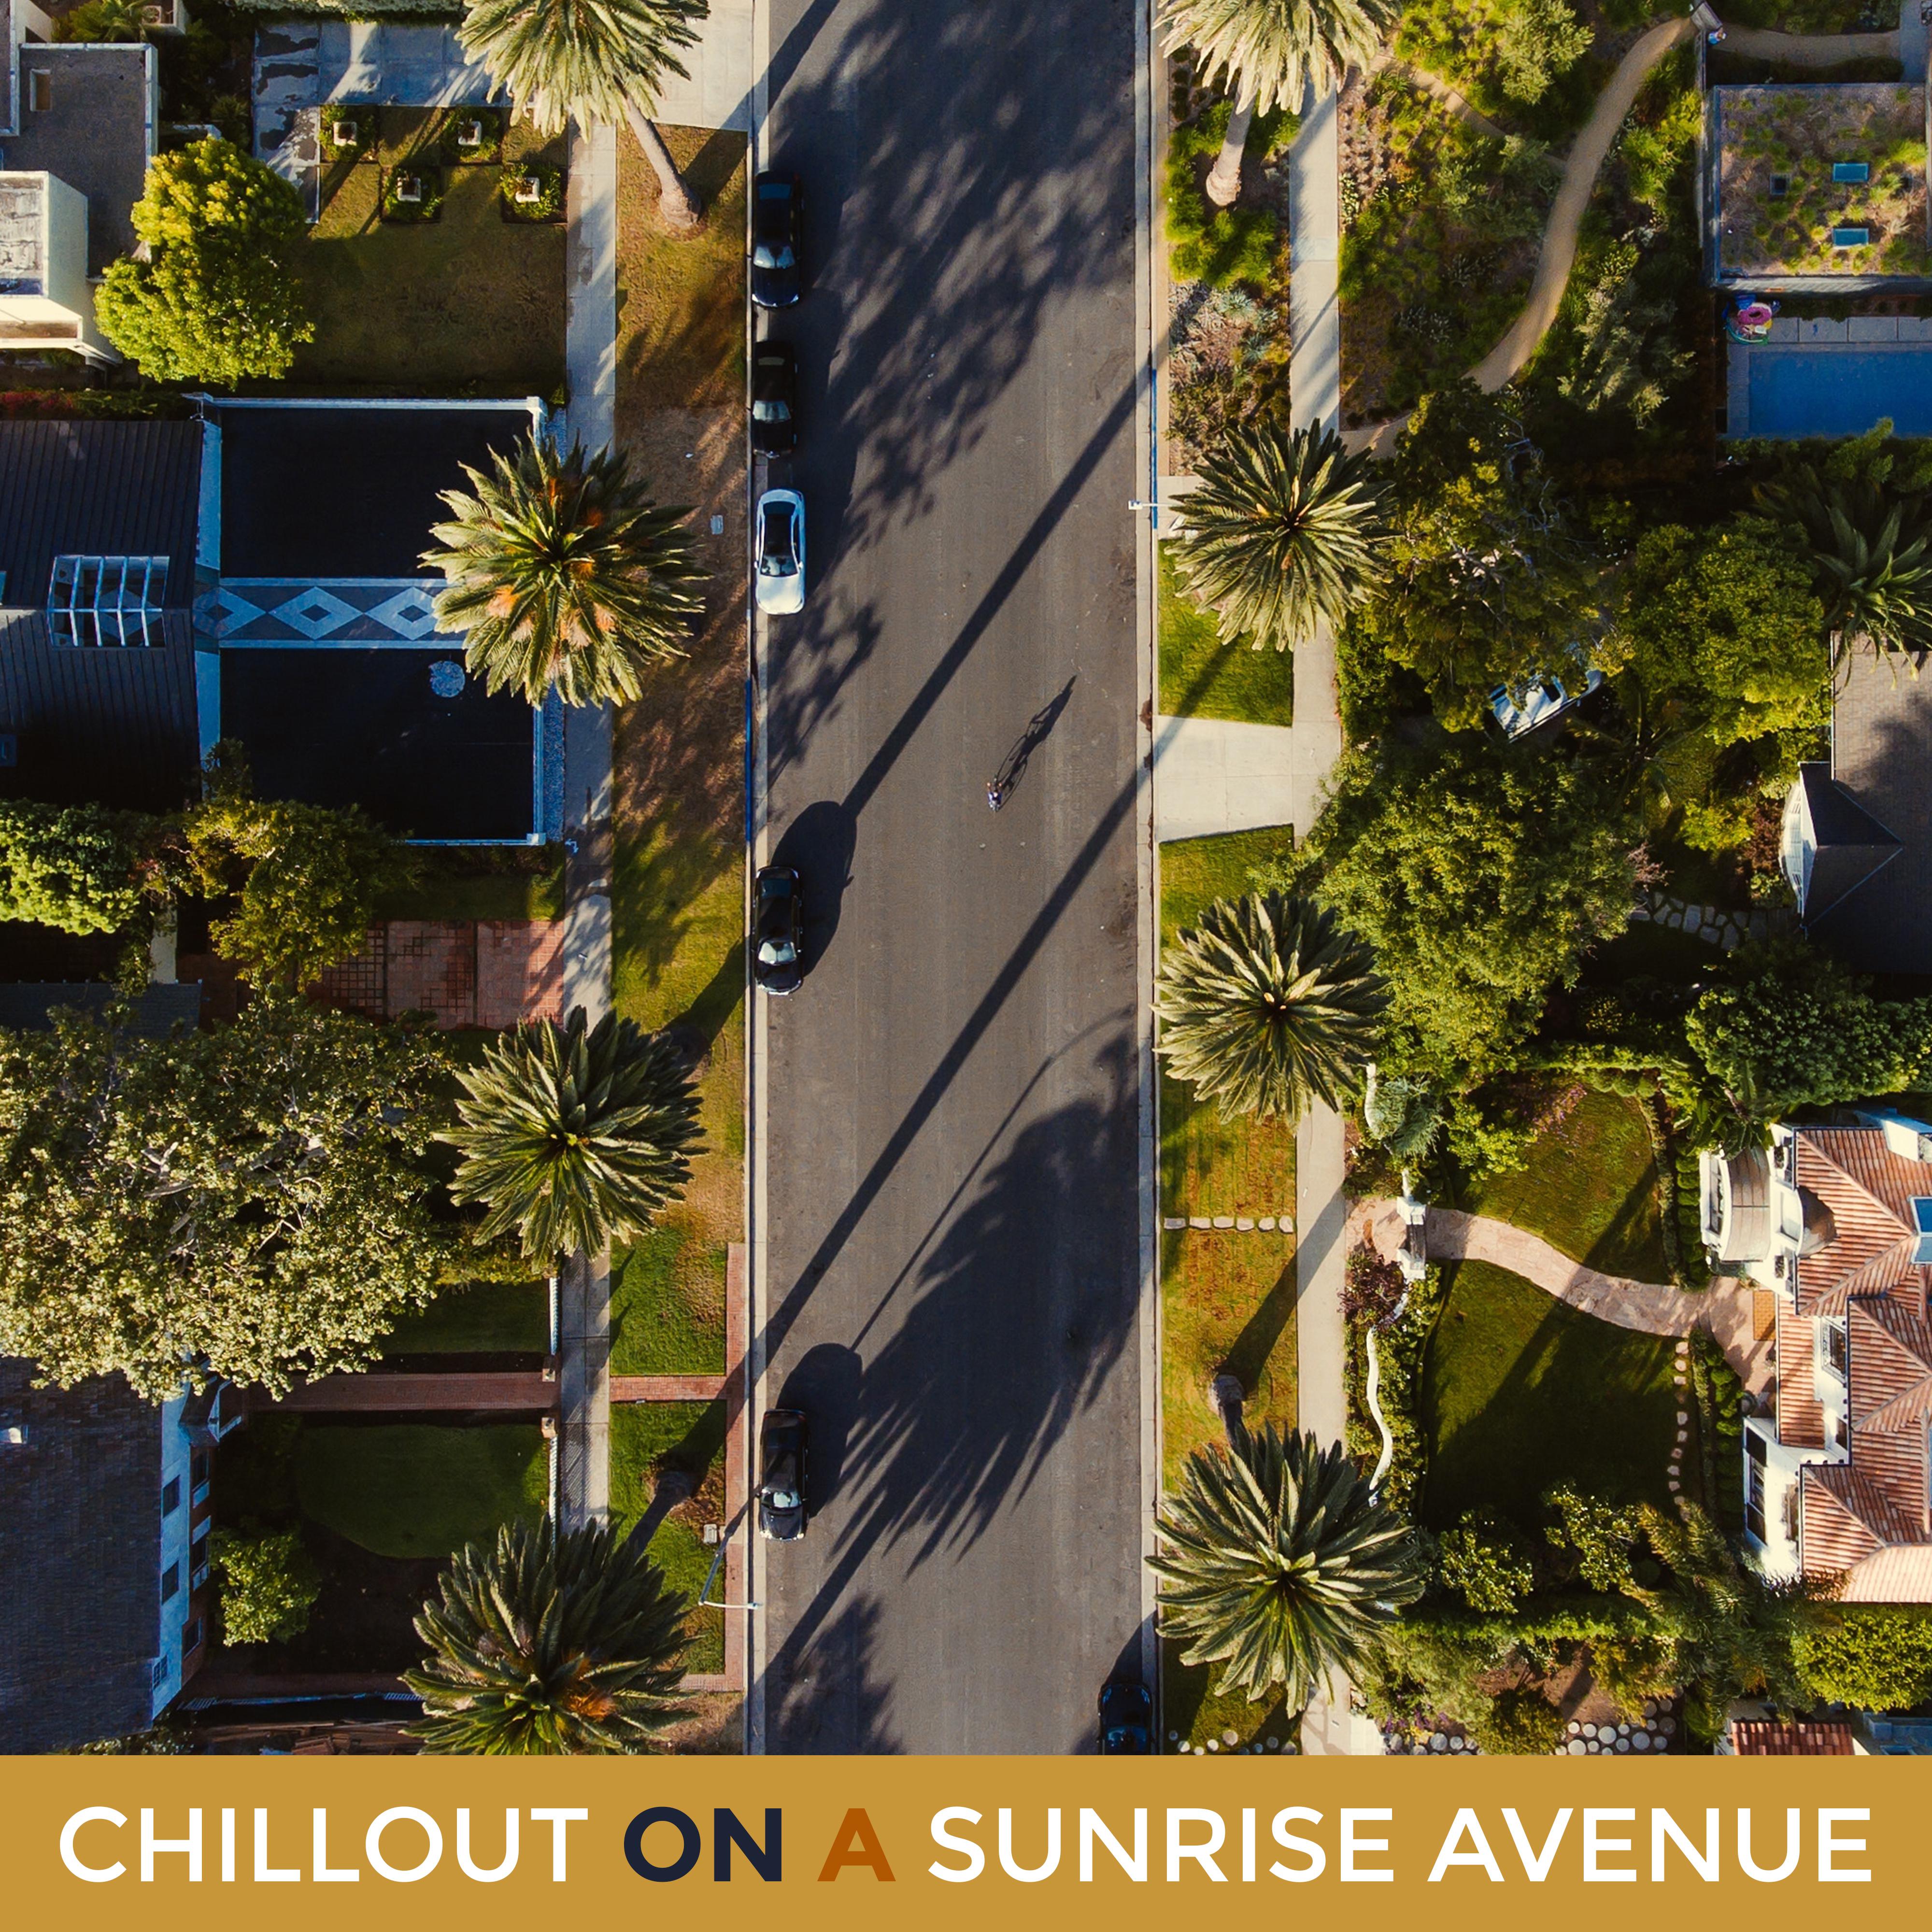 Chillout on a Sunrise Avenue: 2019 Chill Music Collection for Best Relaxation Experience, Holiday Sounds, Tropical Vacation Mix, Ultimate Rest & Calming Down